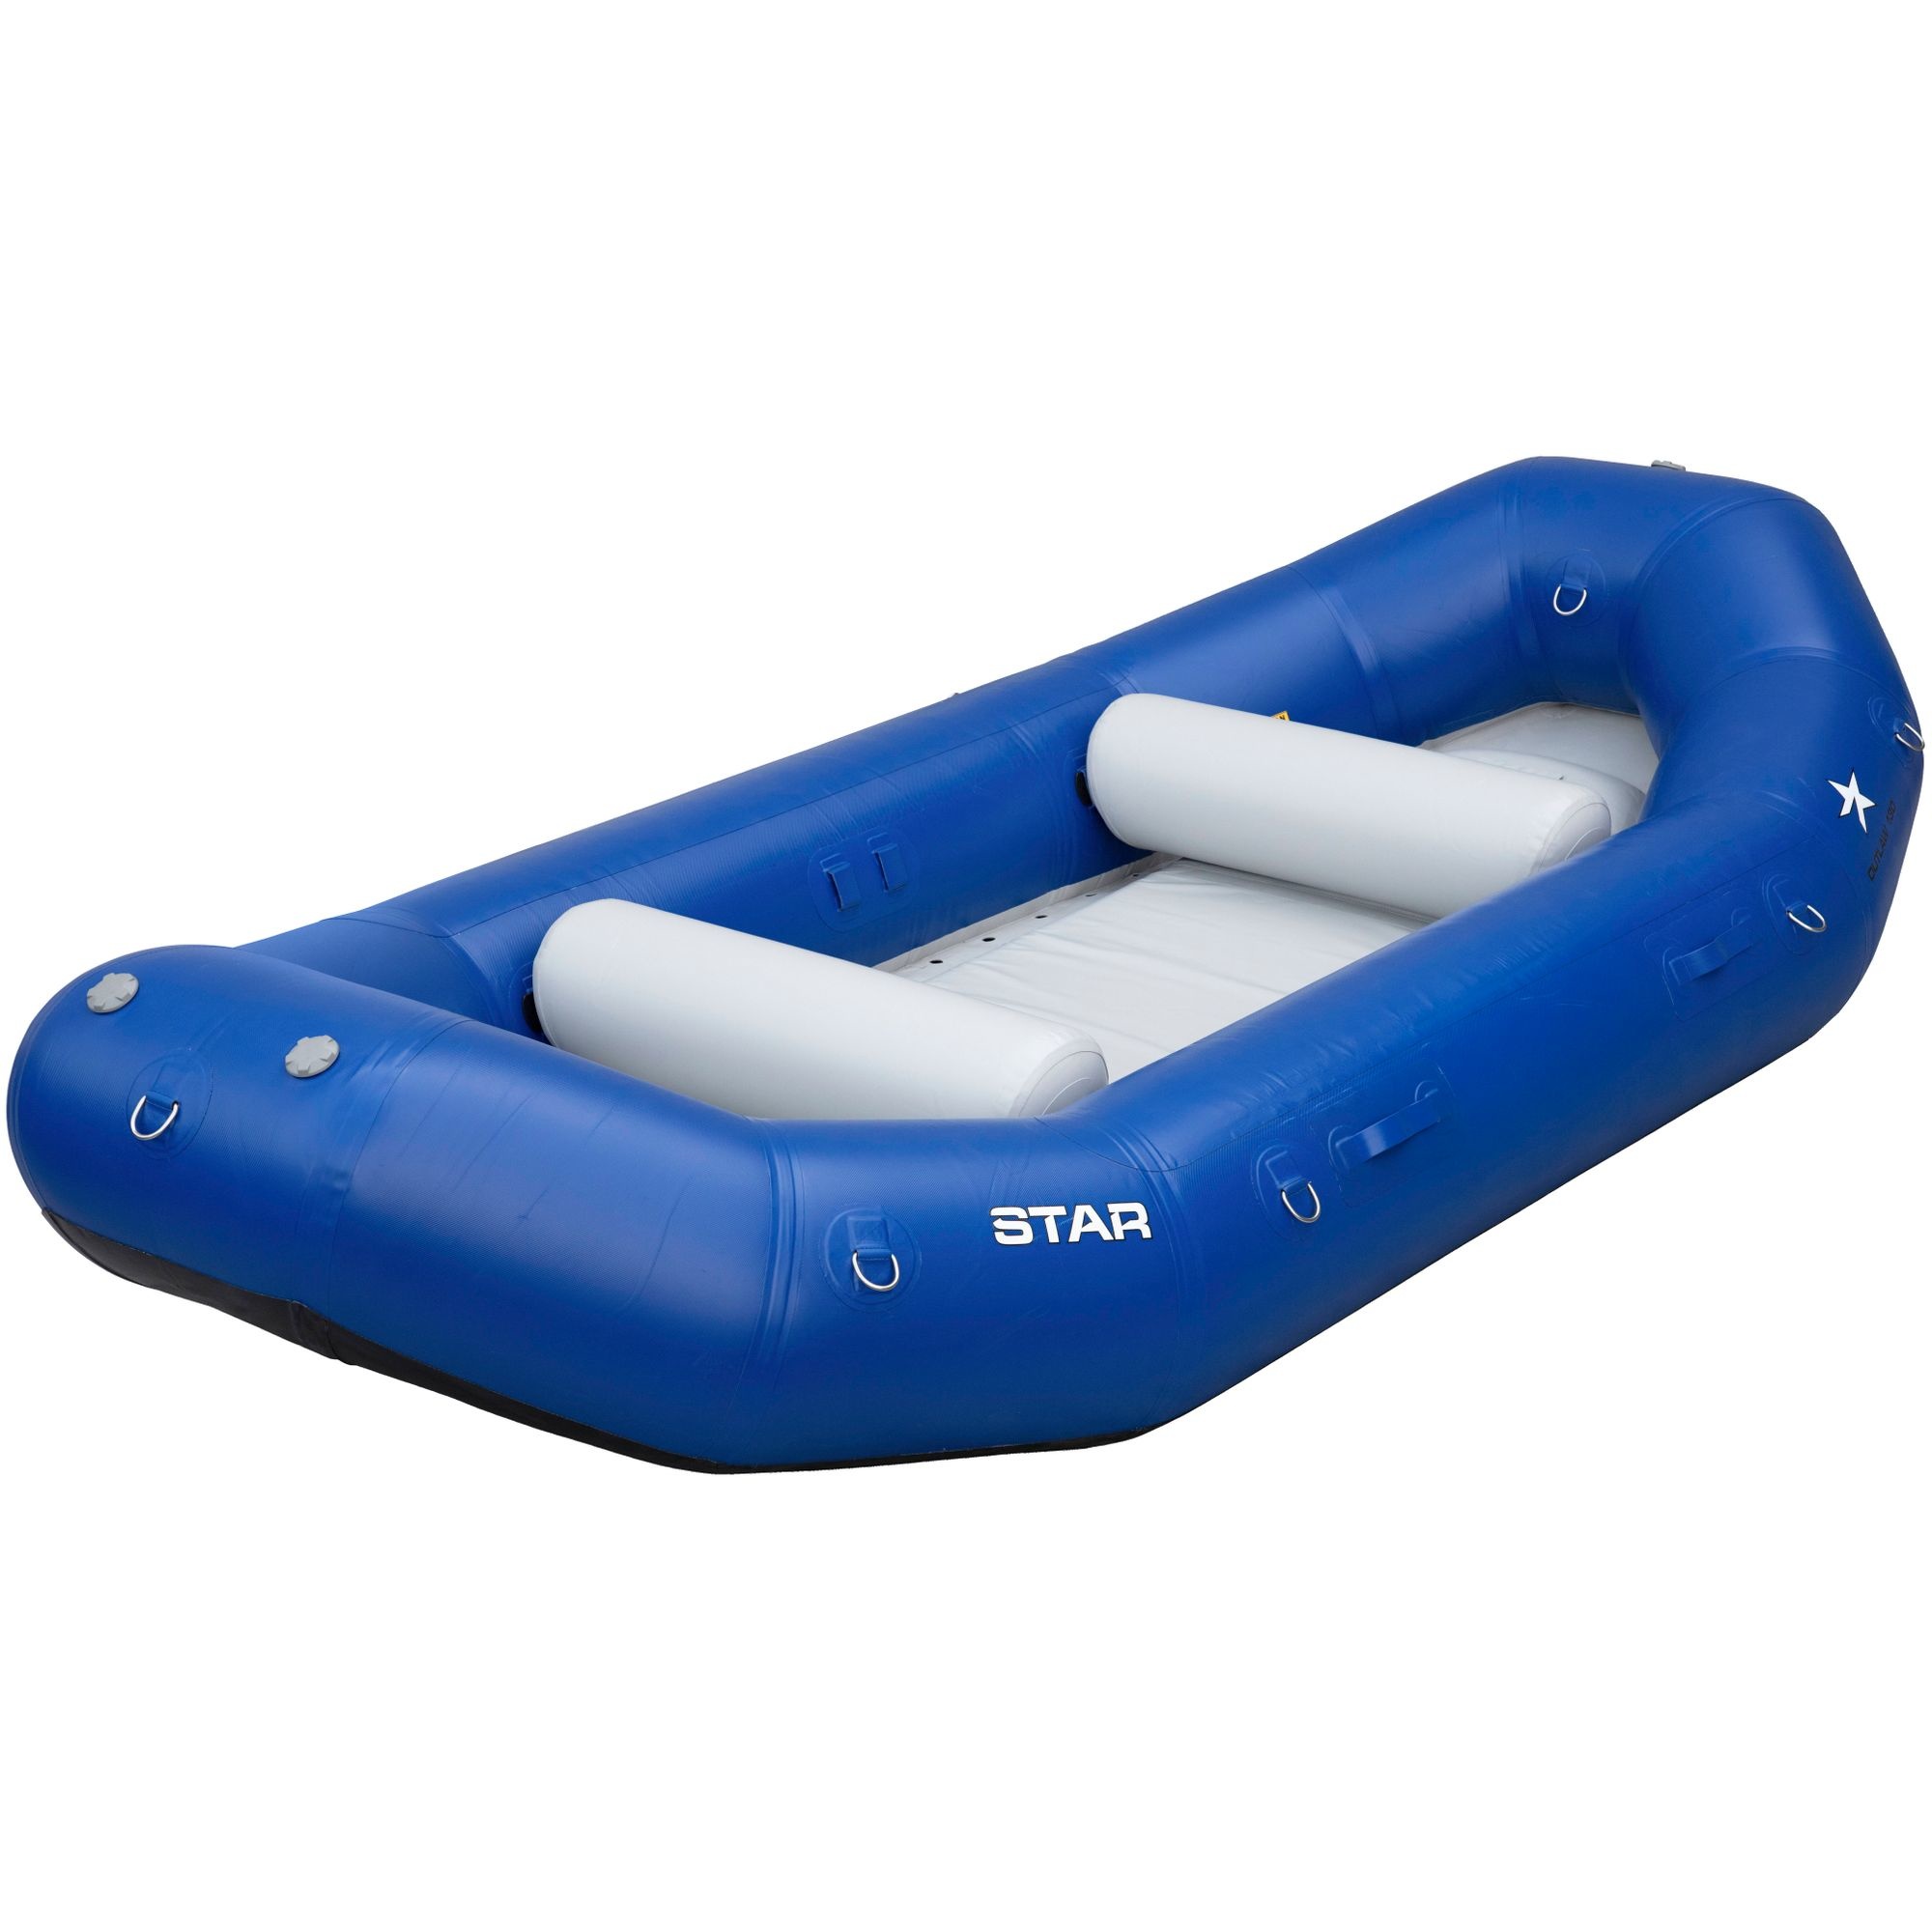 Star Inflatables Star Outlaw 130 Raft